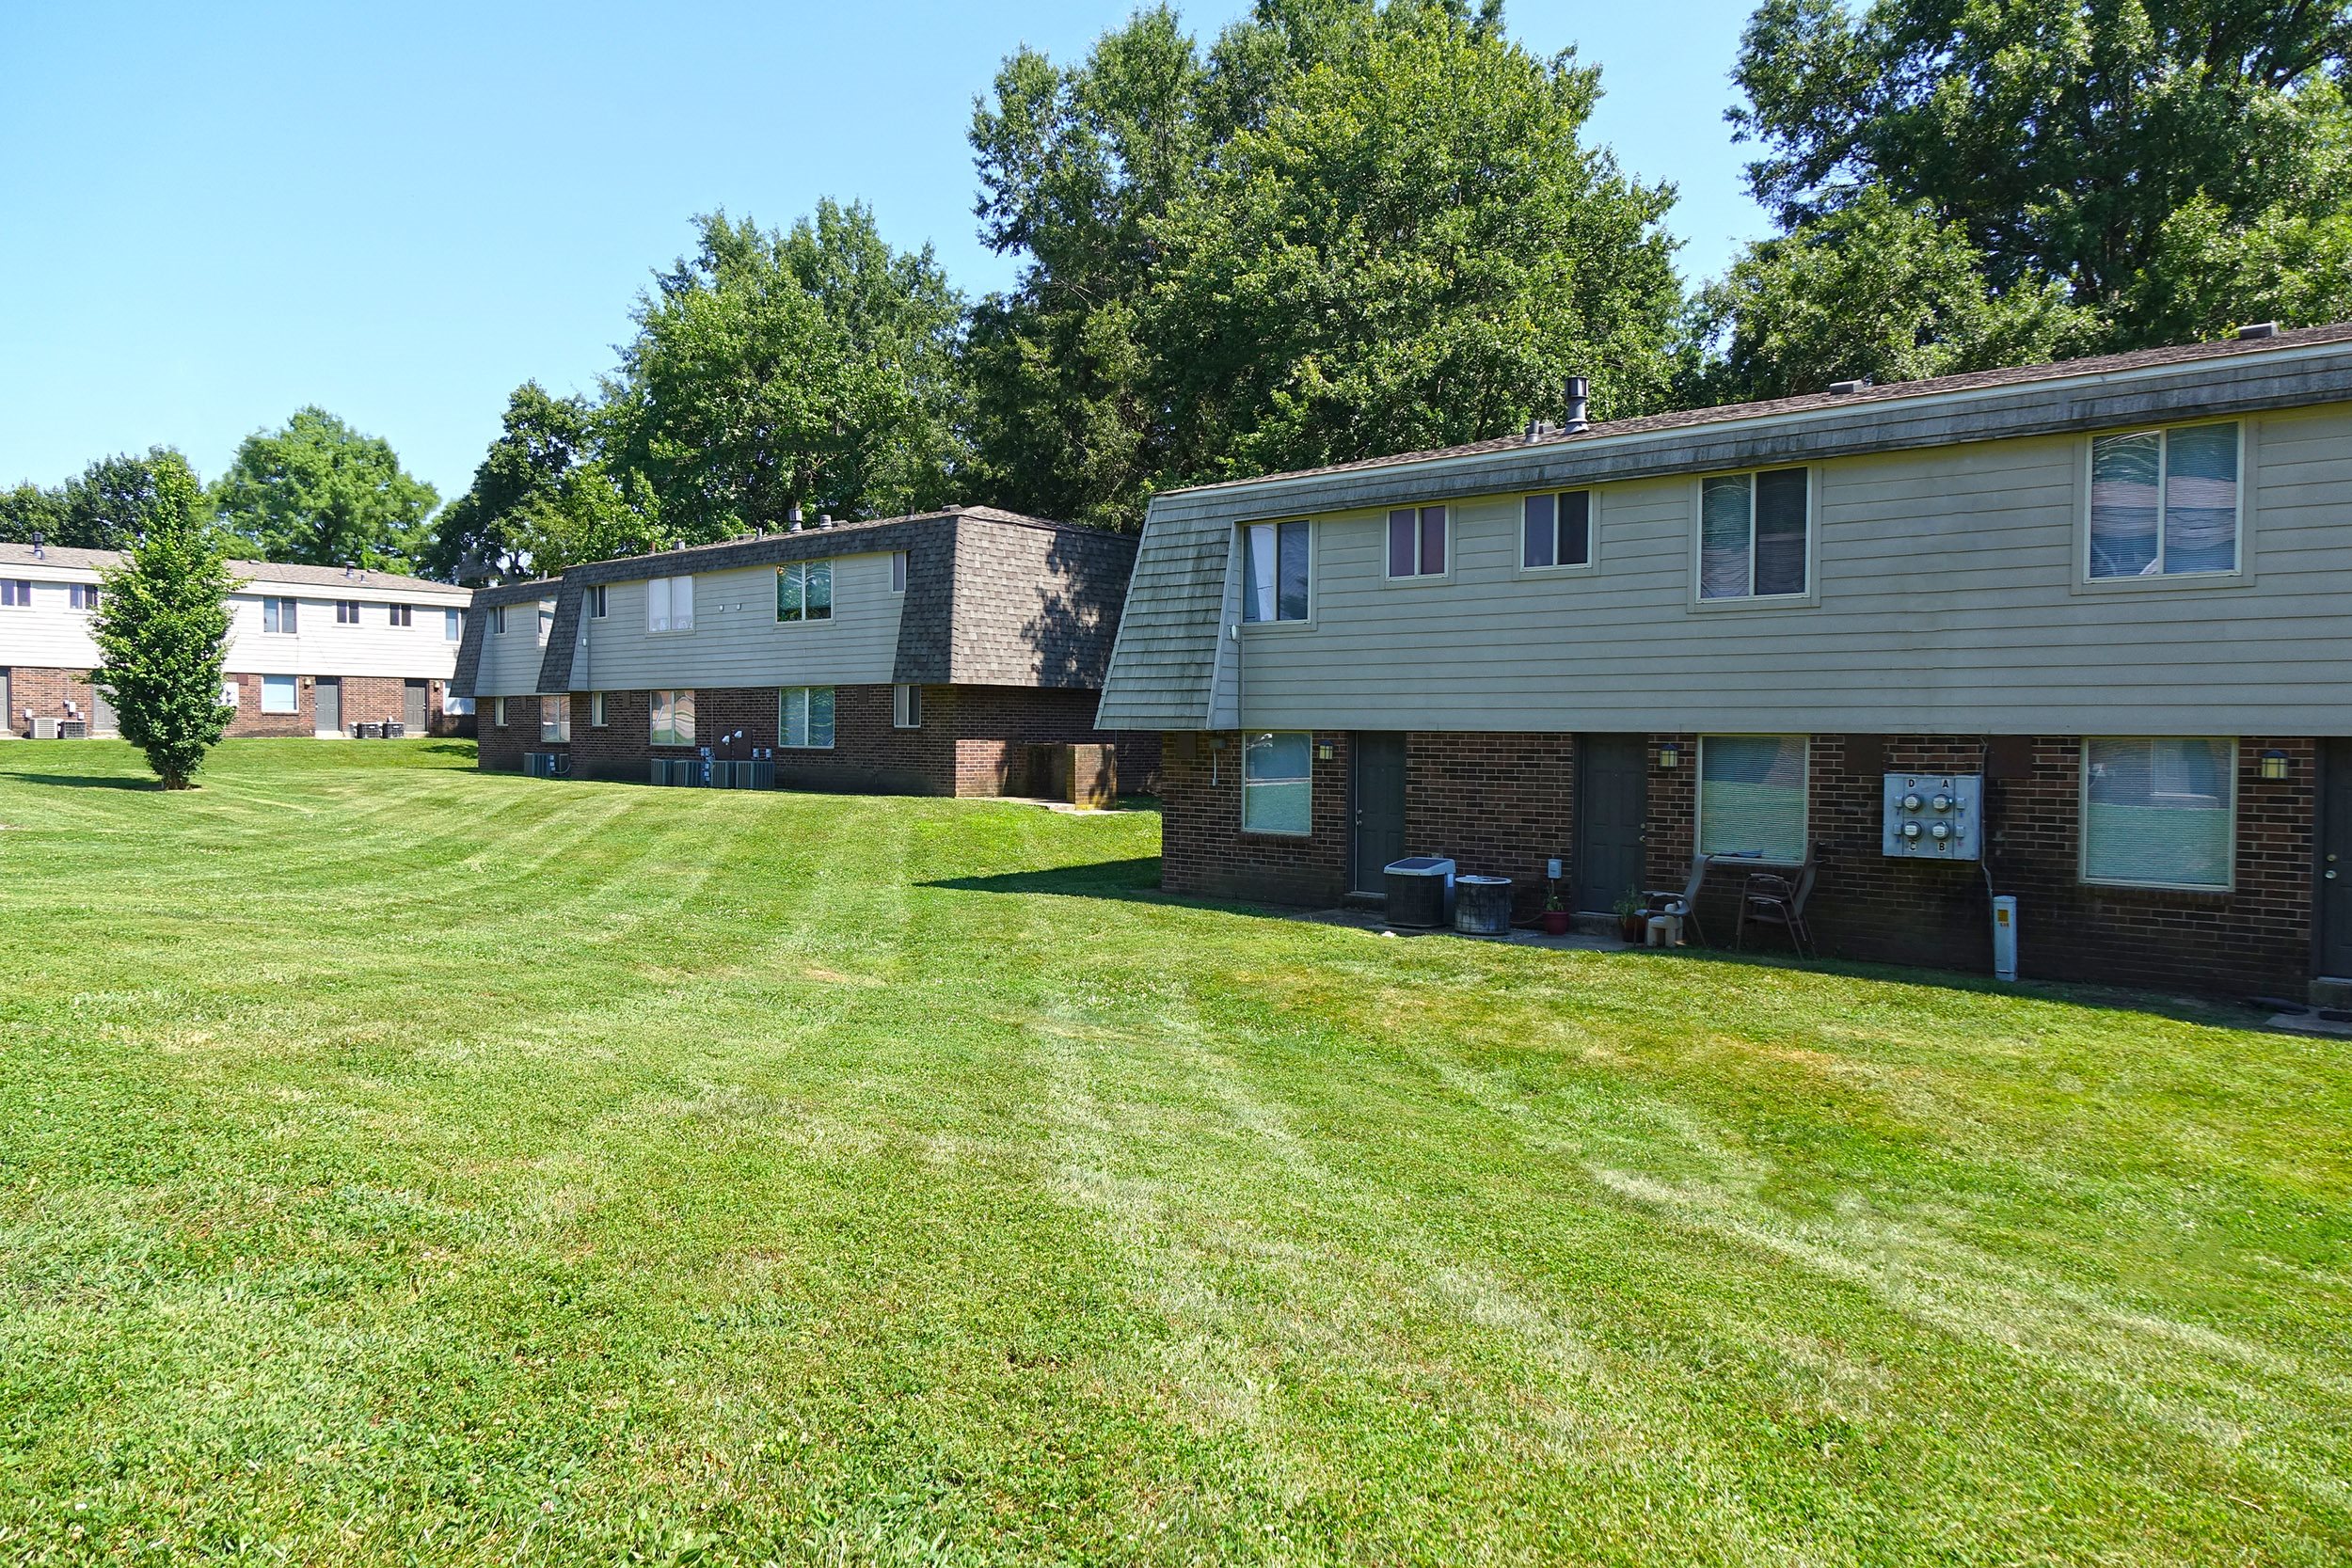 Photos and Video of Southern Oaks Apartments in Georgetown KY